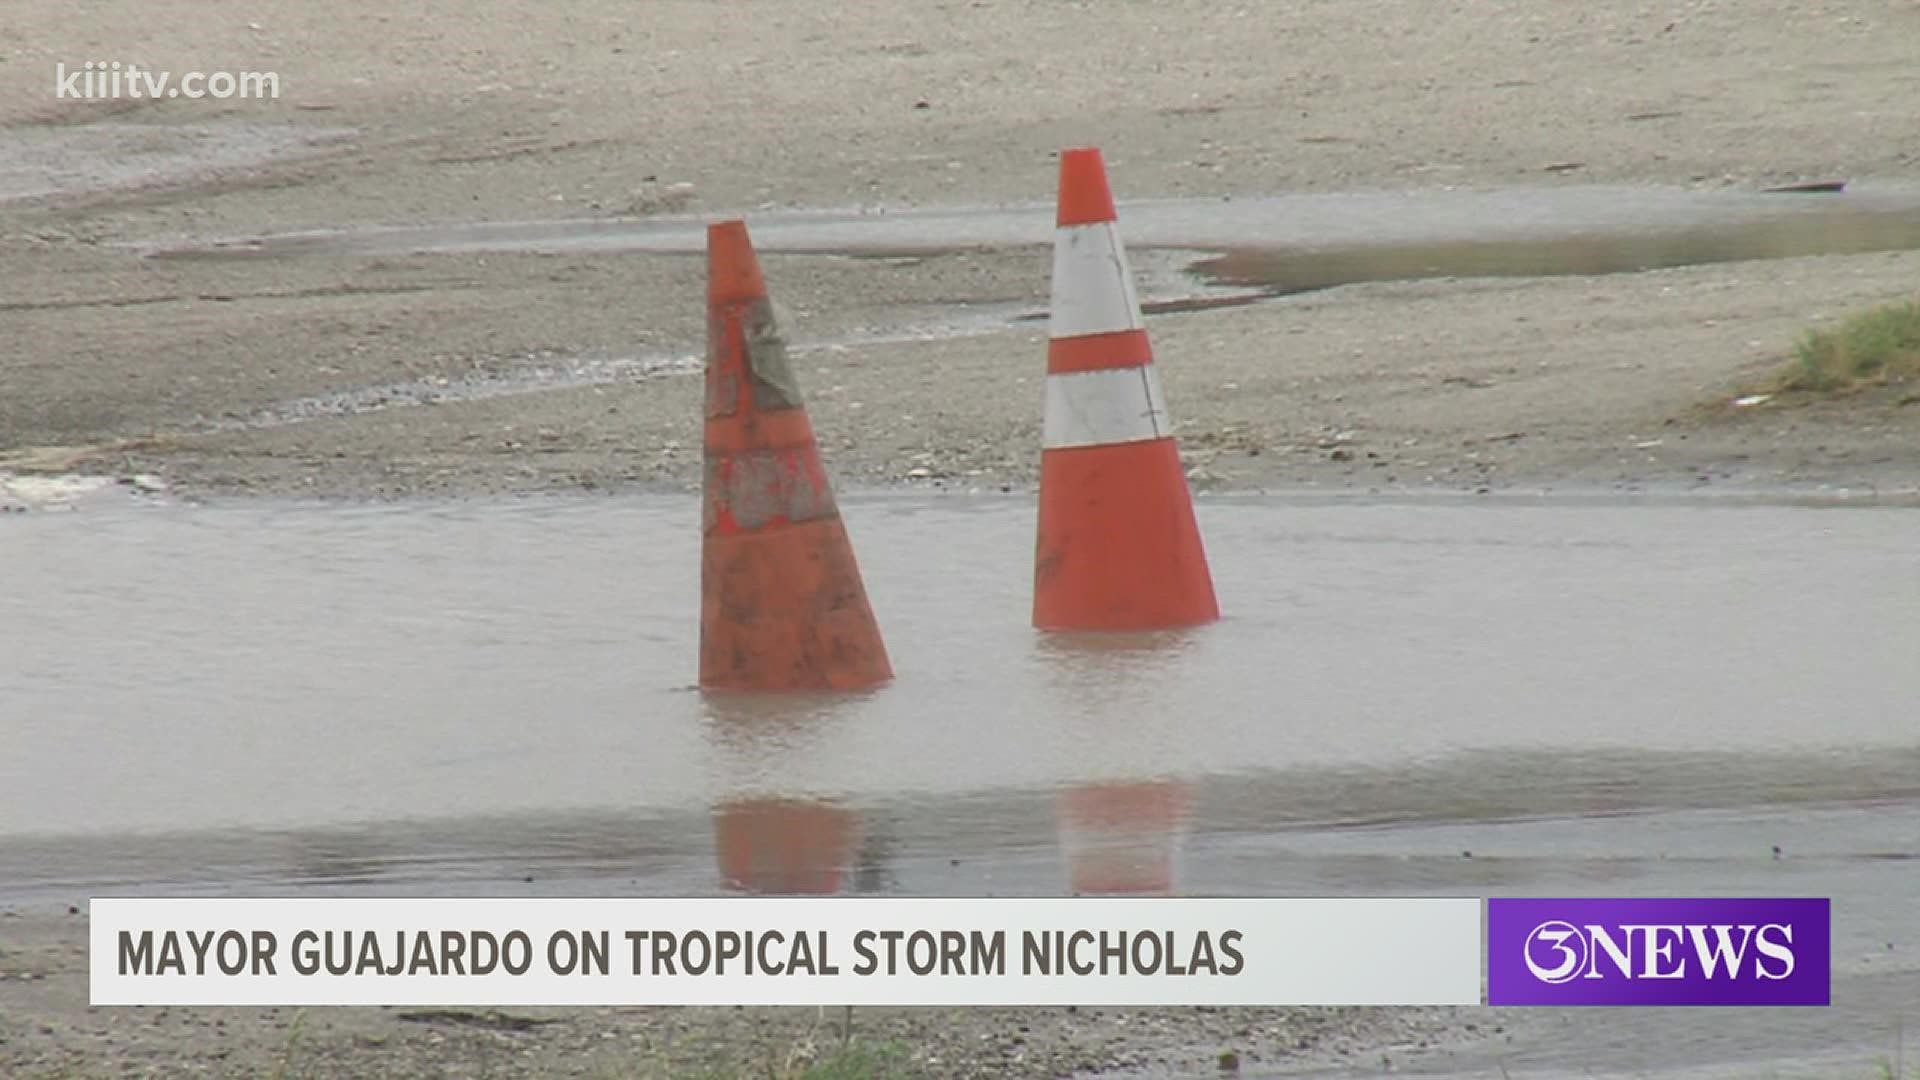 The mayor provides insight about the tropical storm as it passes through the Coastal Bend.